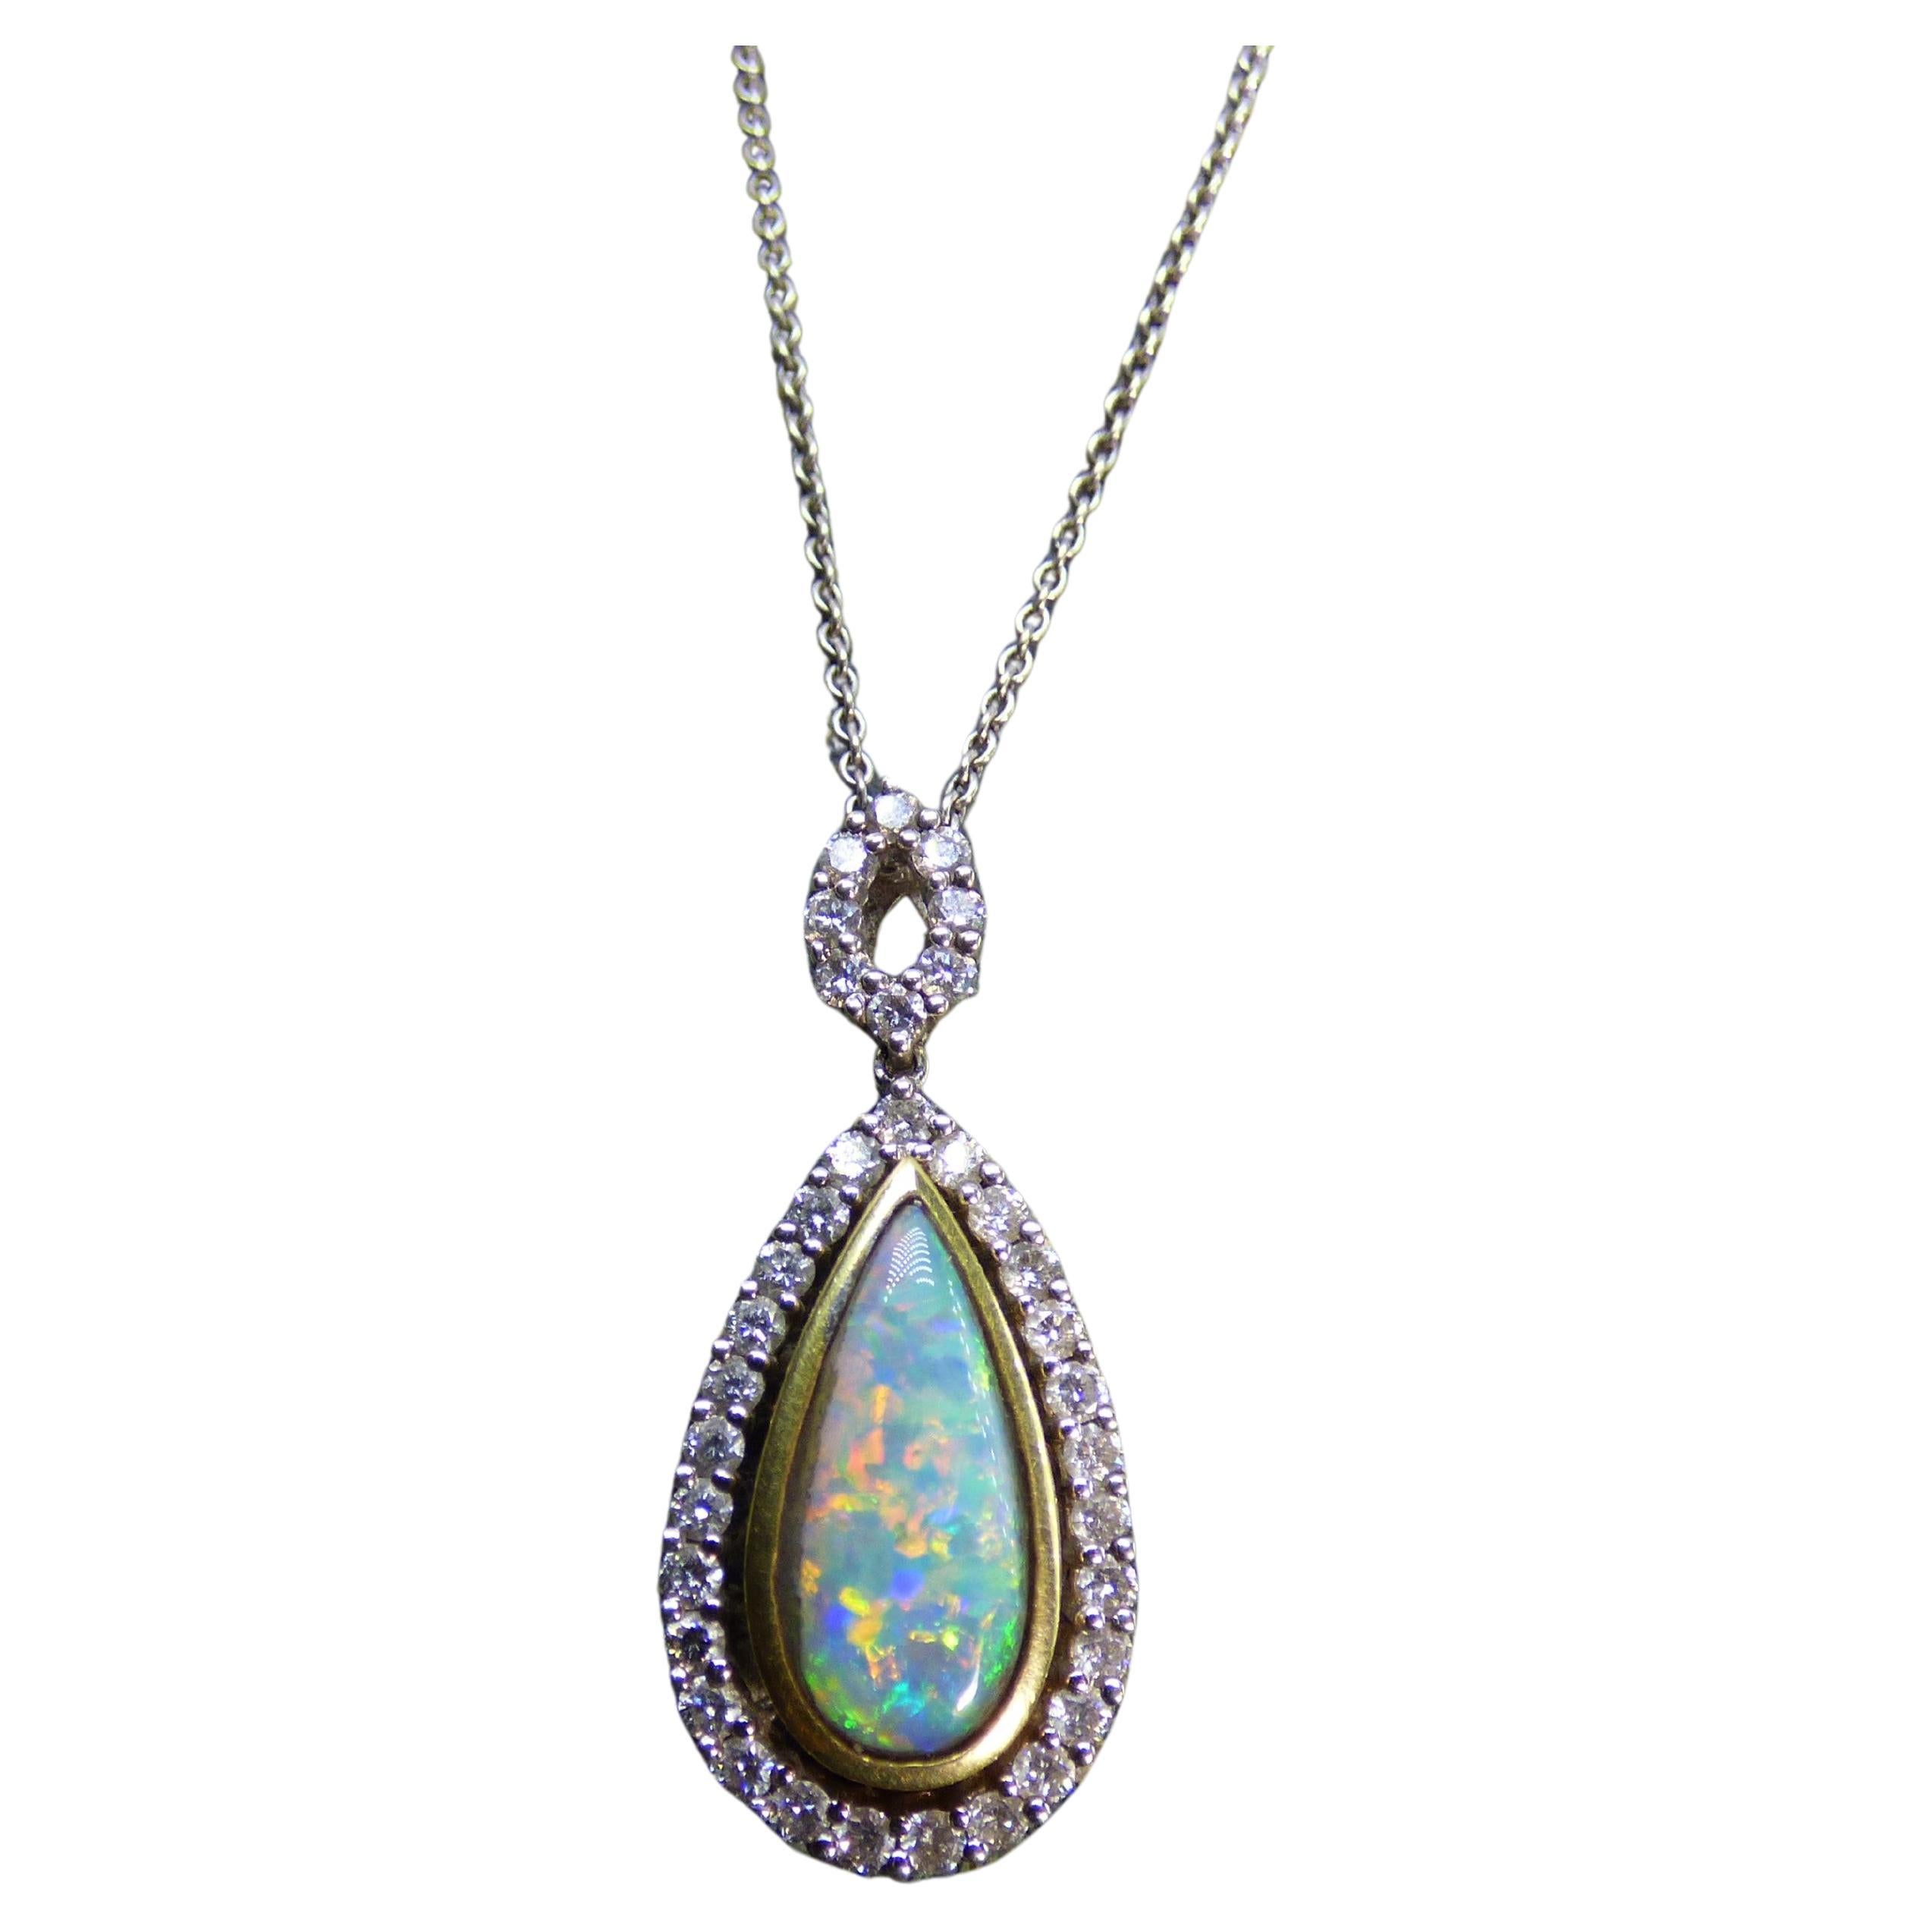 Long pear shaped Opal and Diamond Pendant with 18" chain in 18K gold. For Sale